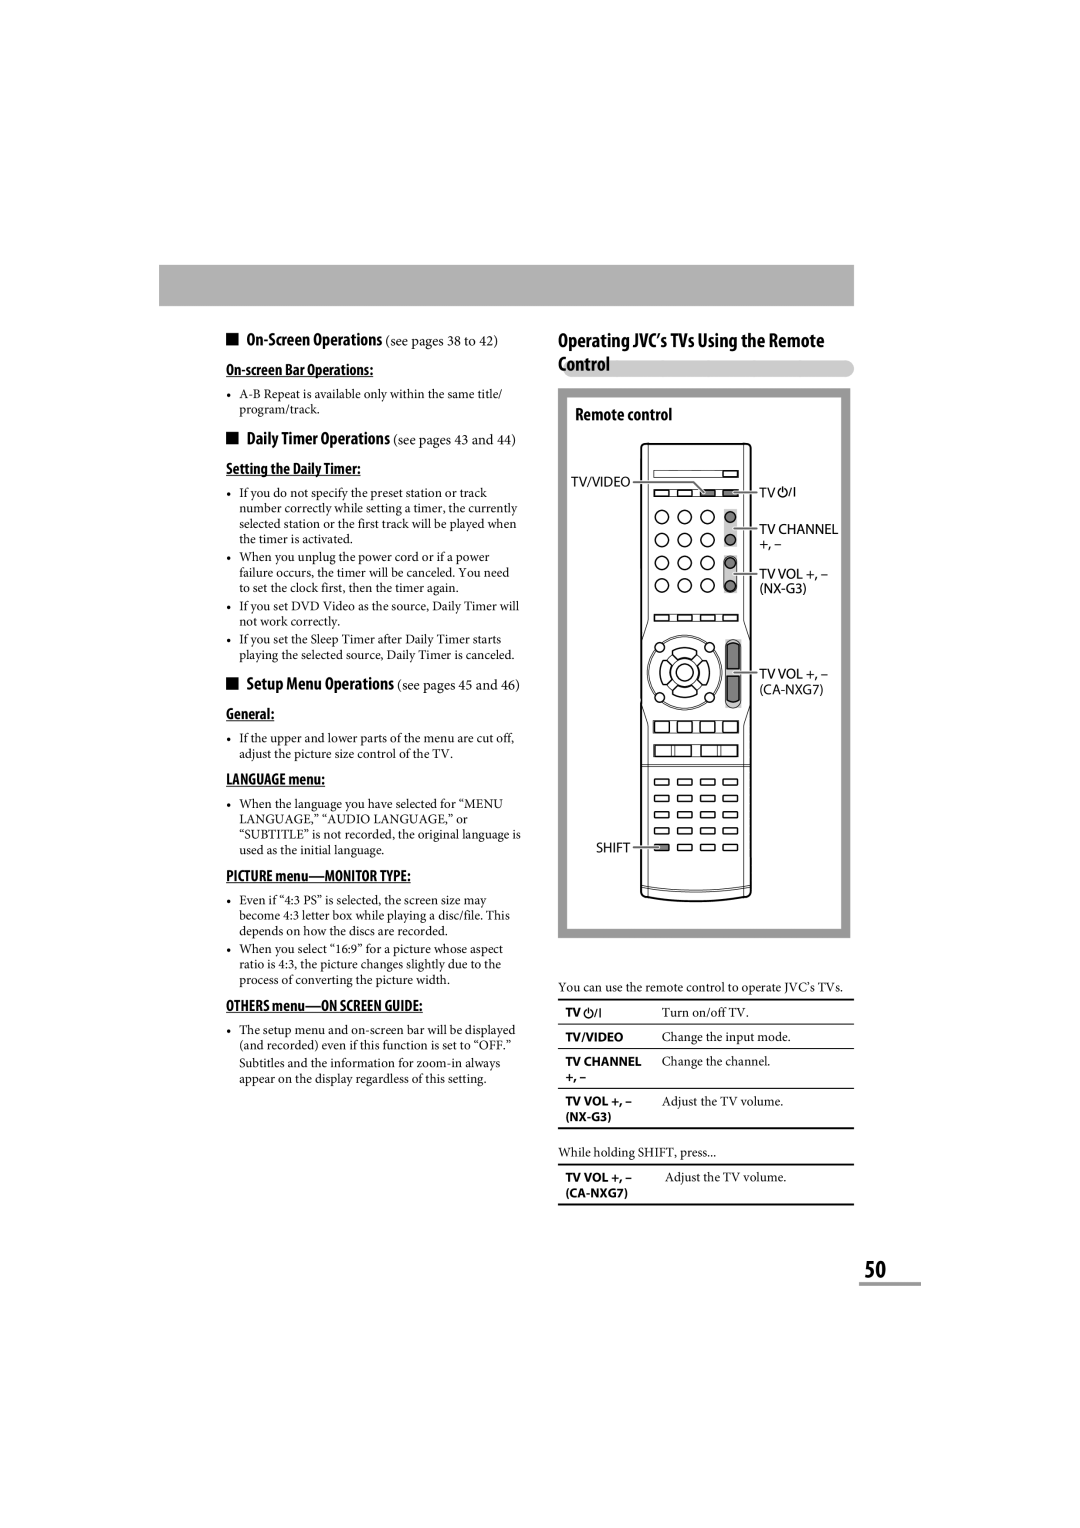 JVC CA-NXG9 On-ScreenOperations see pages 38 to, Daily Timer Operations see pages 43 and, Remote control, LANGUAGE menu 